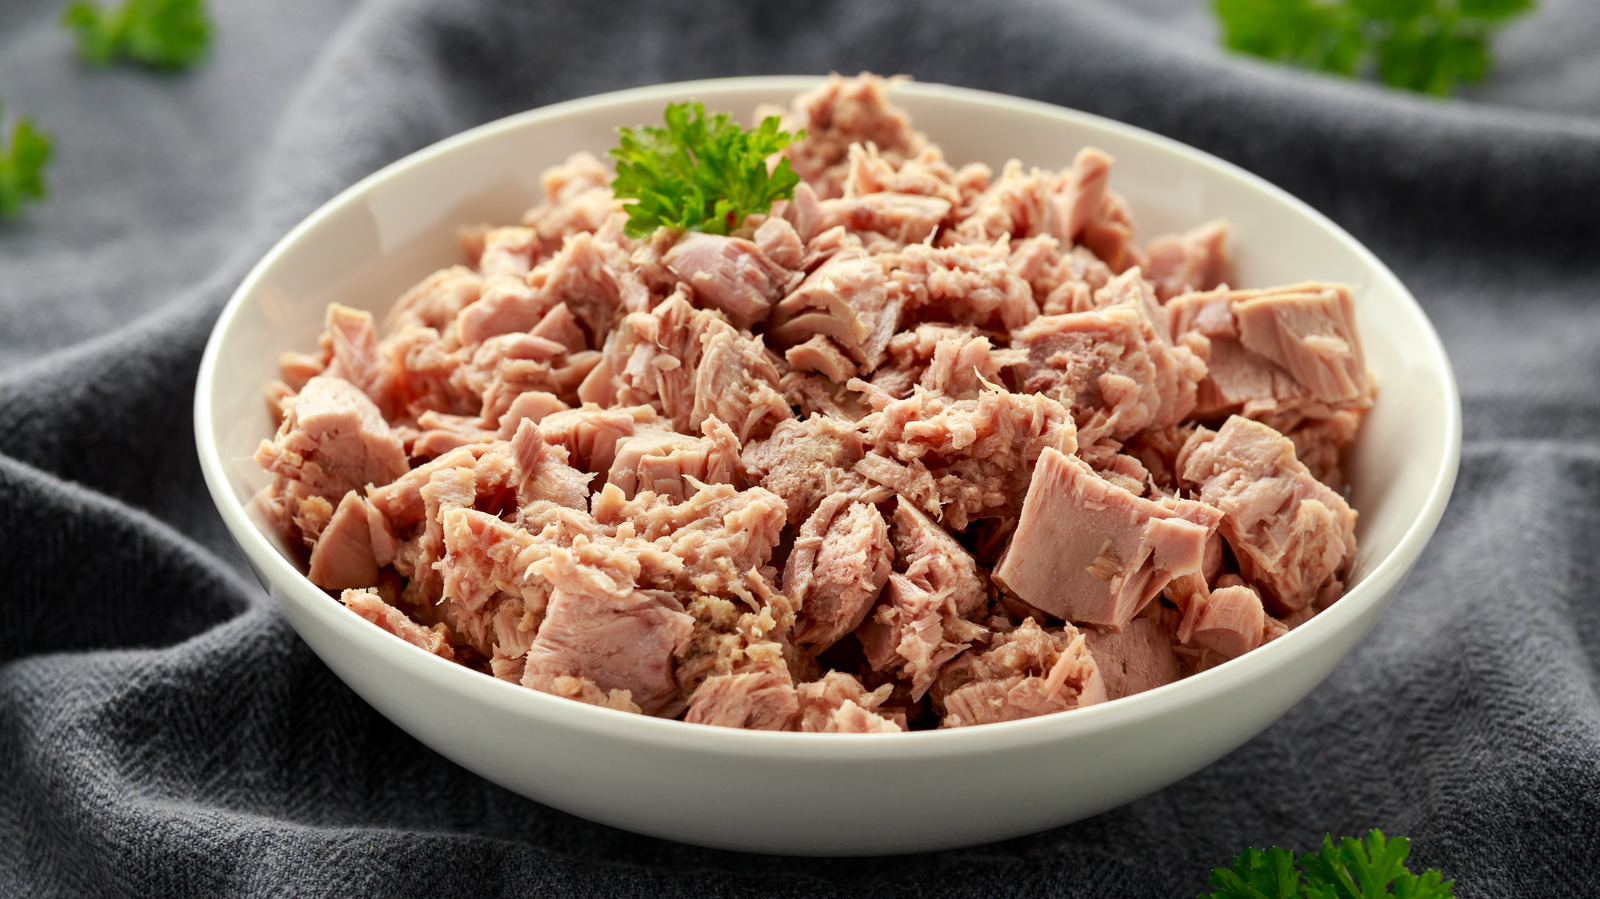 Is There A Difference Between Pouched And Canned Tuna?